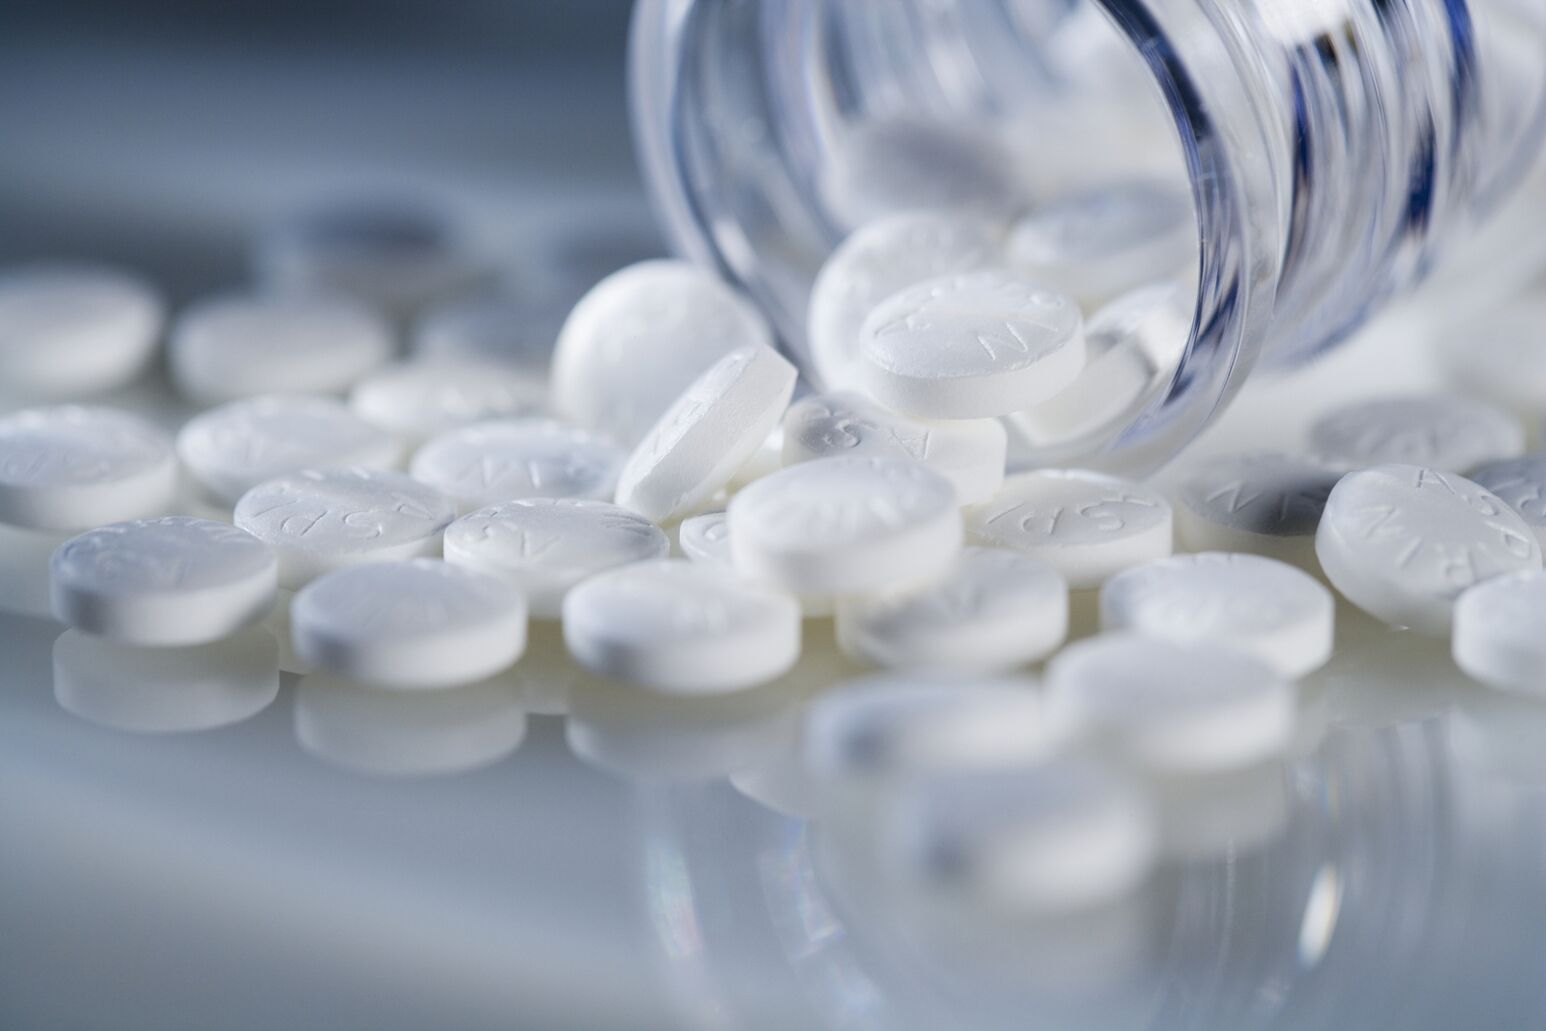 Low-dose aspirin daily use could increase cancer risk for seniors |  Northwell Health